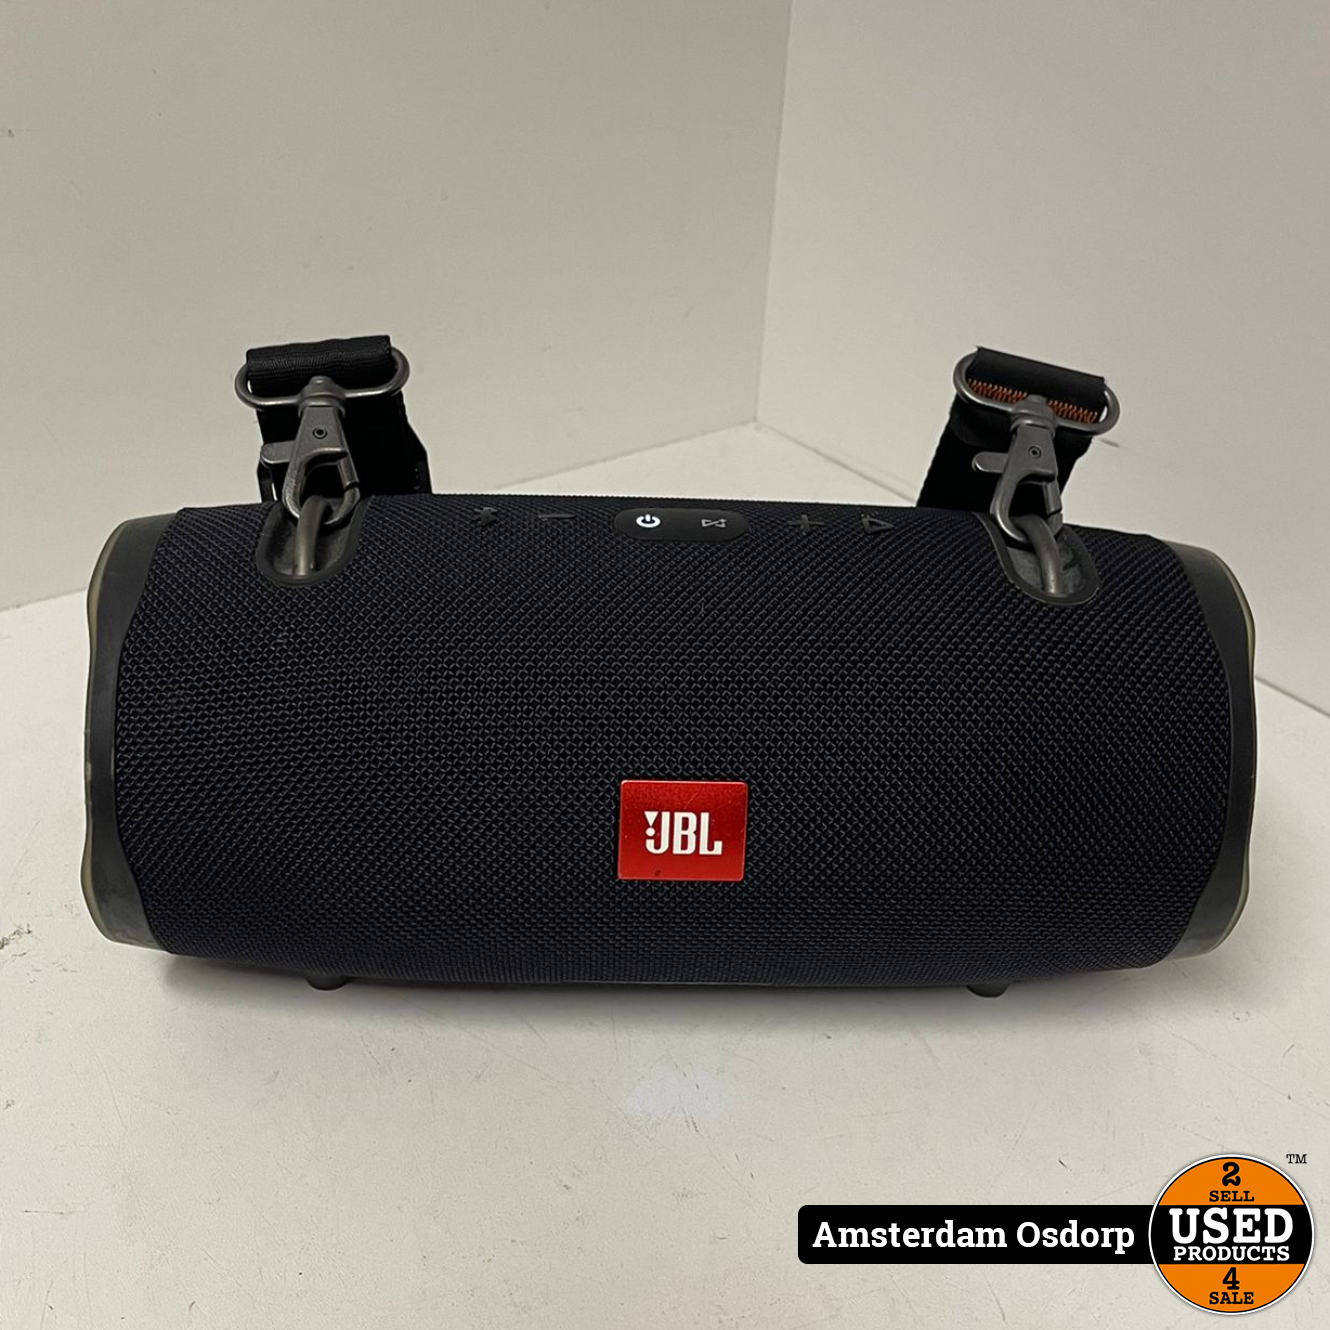 atleet borst Il JBL Xtreme 2 | Zwart | In Nette Staat - Used Products Osdorp